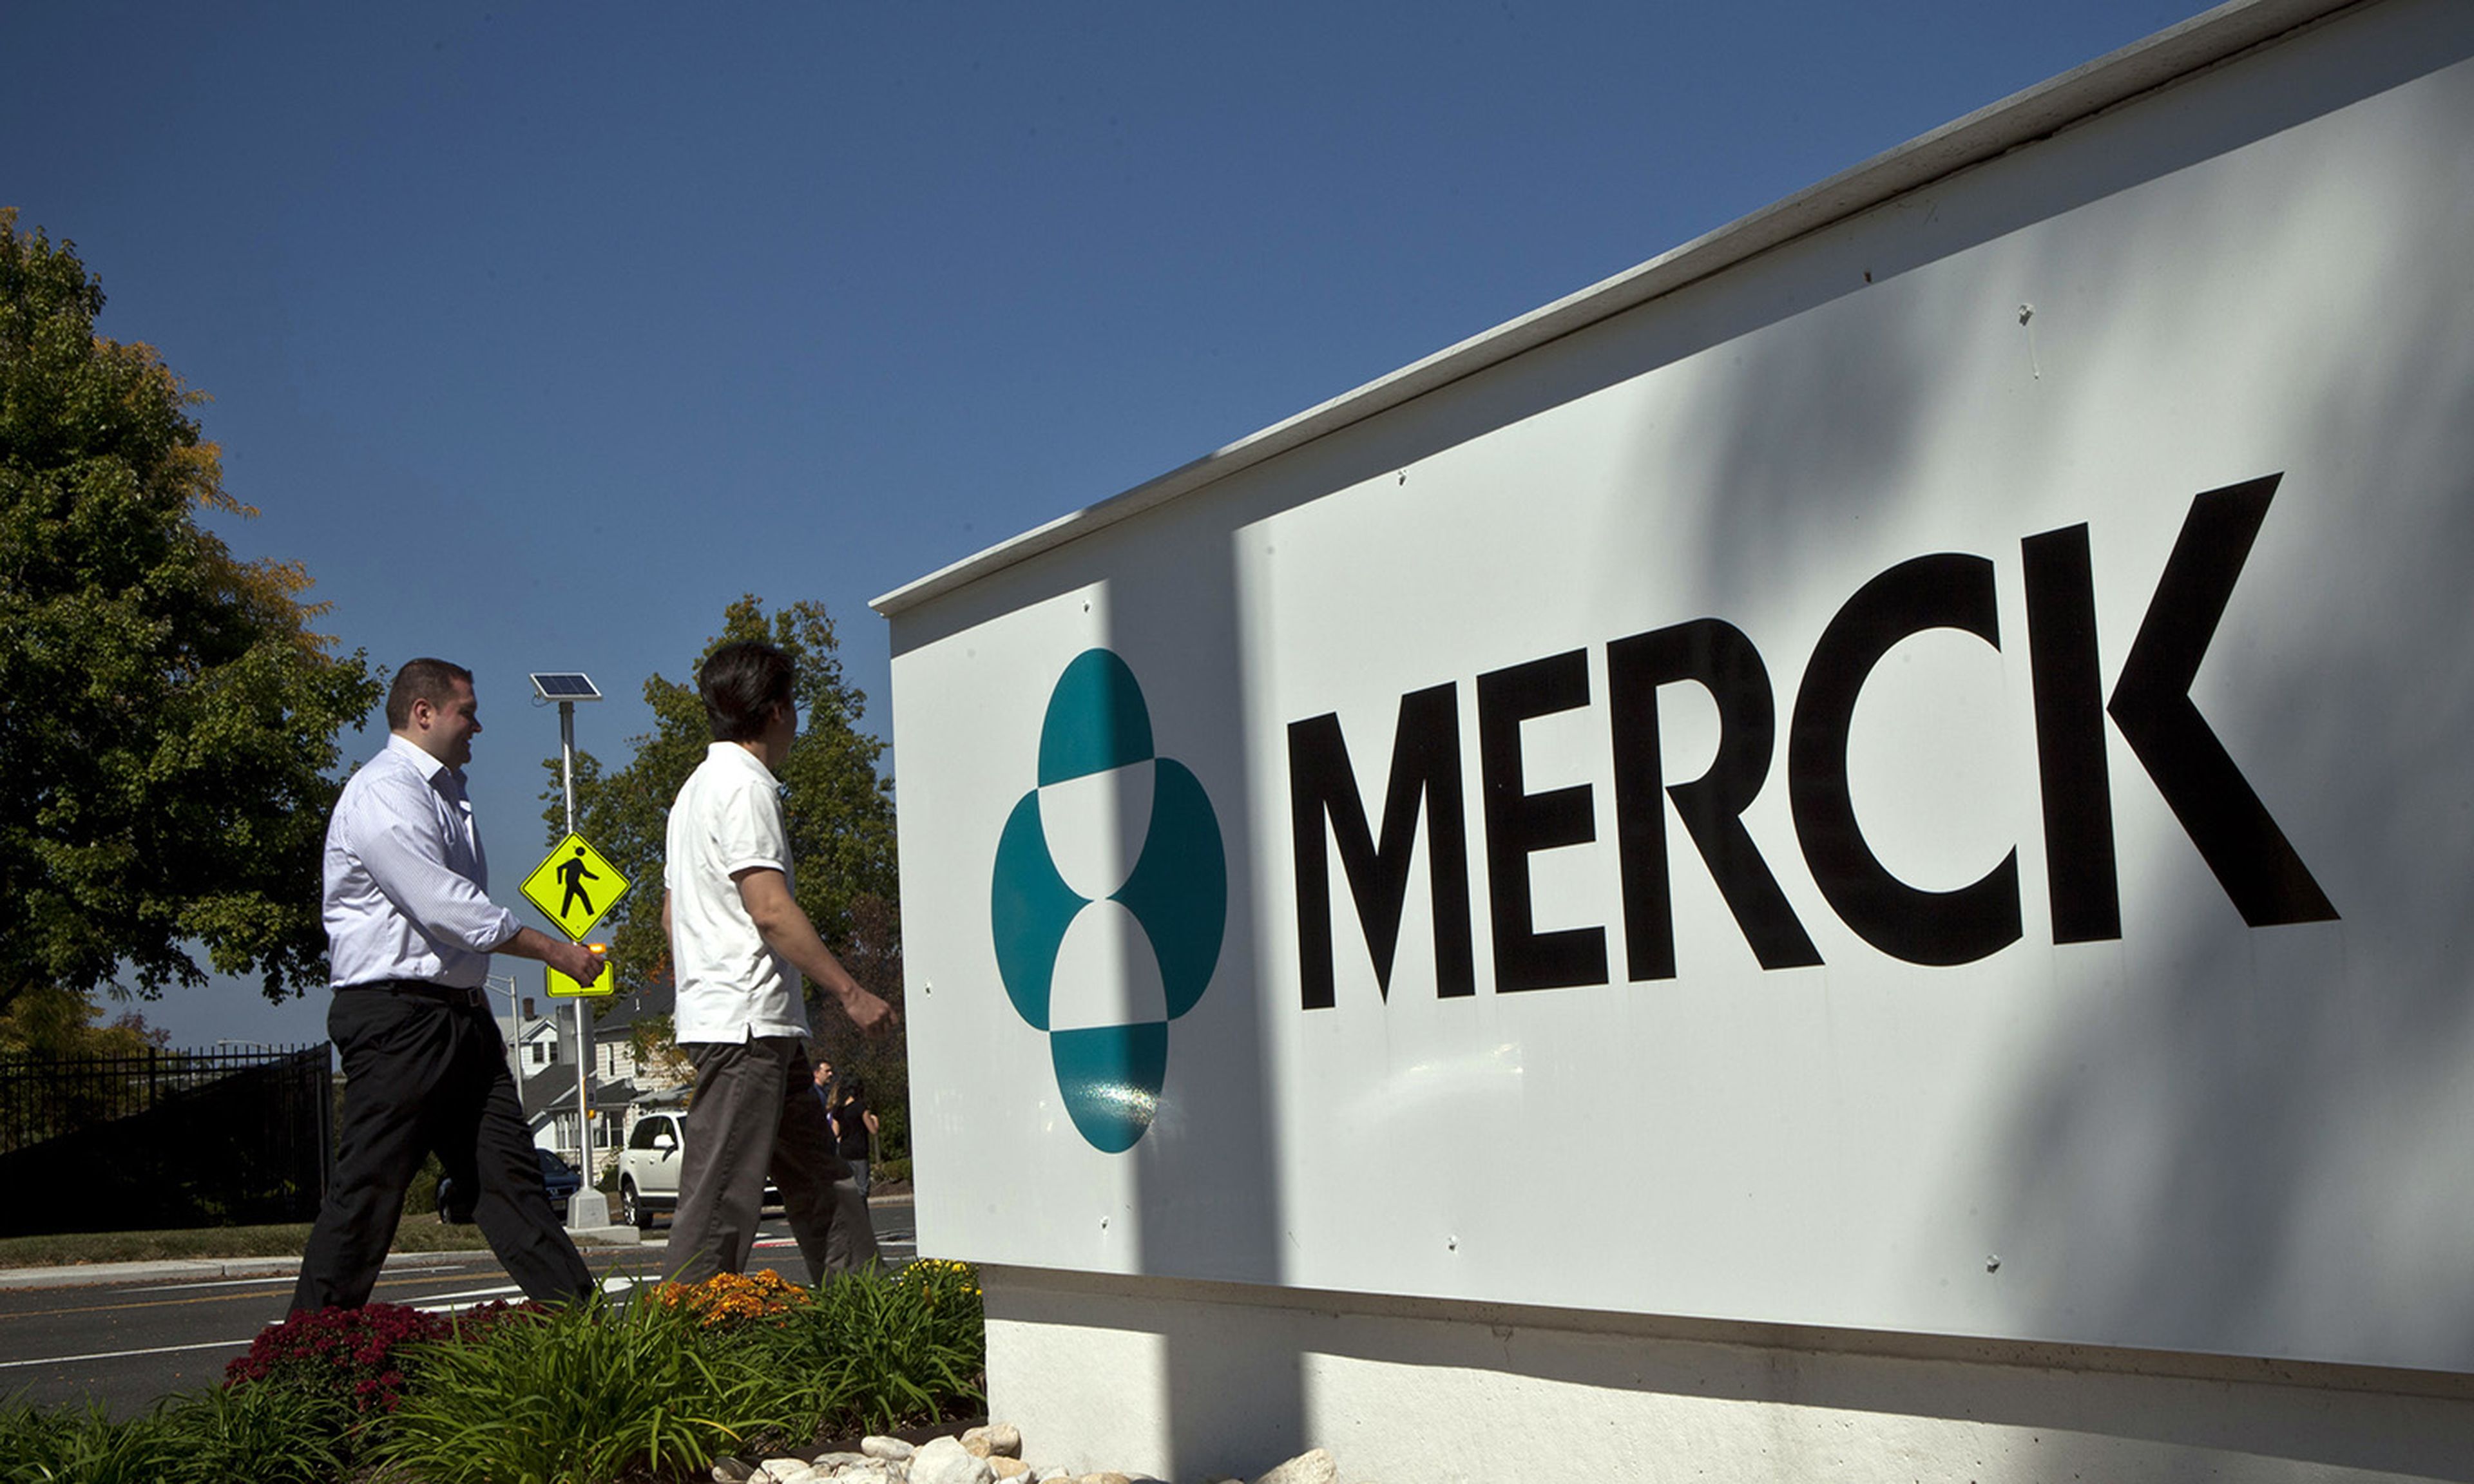 Merck employees walk past a Merck sign in front of the company&#8217;s building on Oct. 2, 2013, in Summit, N.J. (Photo by Kena Betancur/Getty Images)